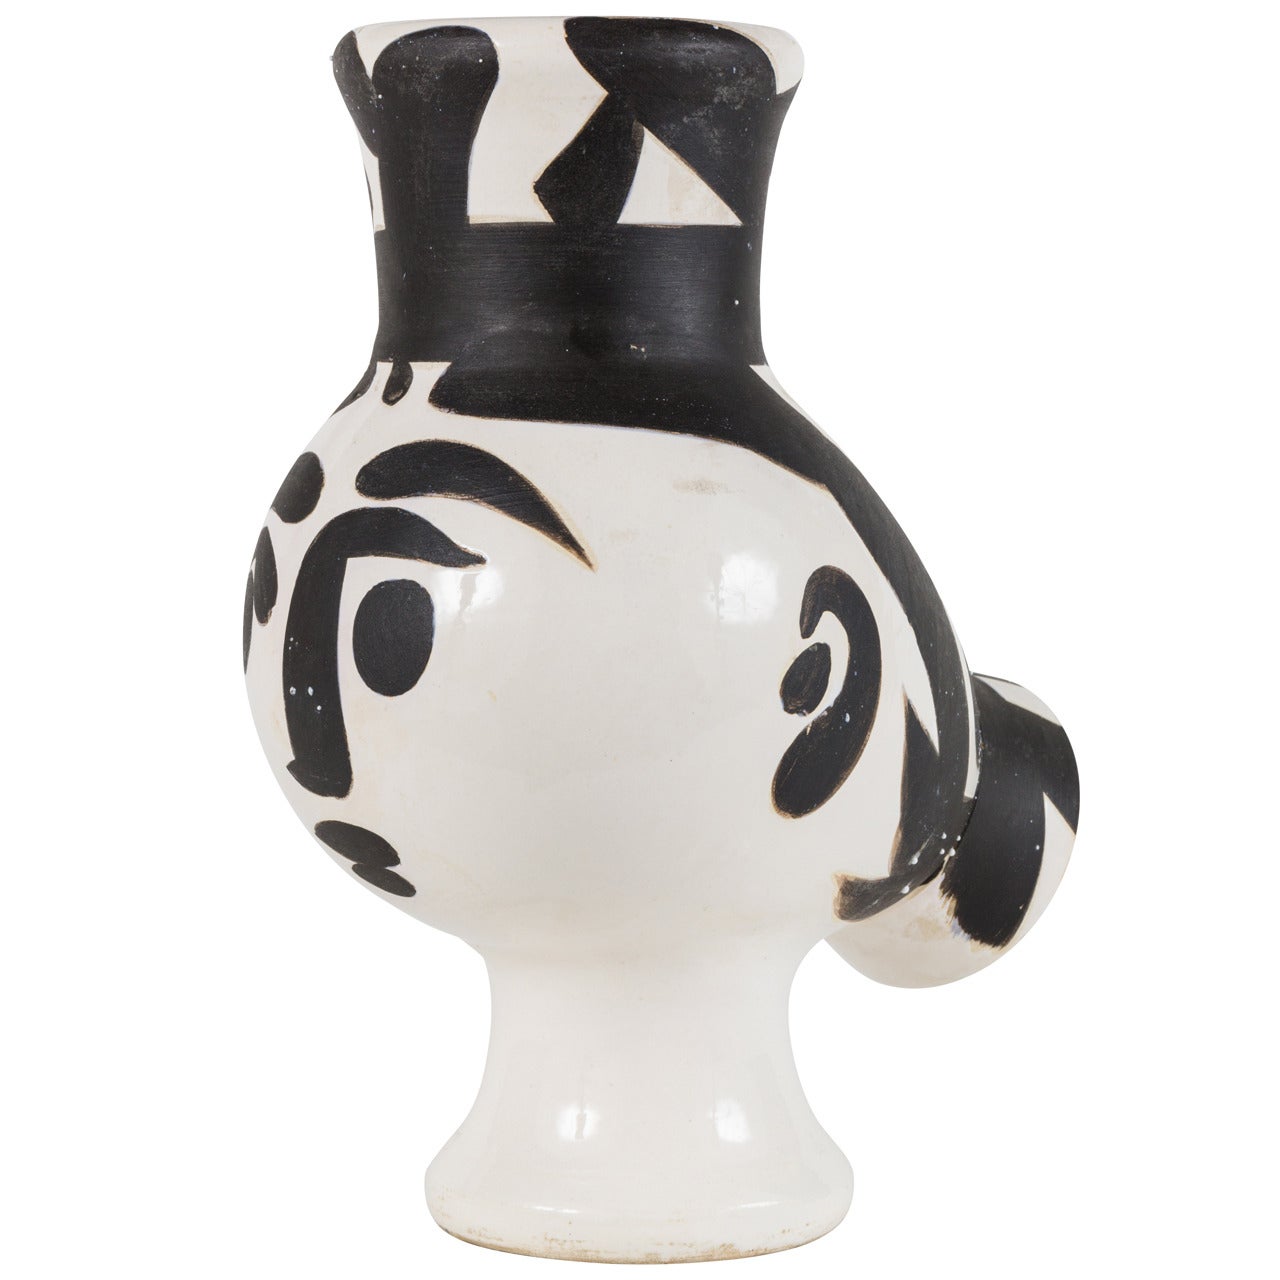 Chouette Femme or Owl Woman Vase by Picasso for Madoura Ceramics, No. 119